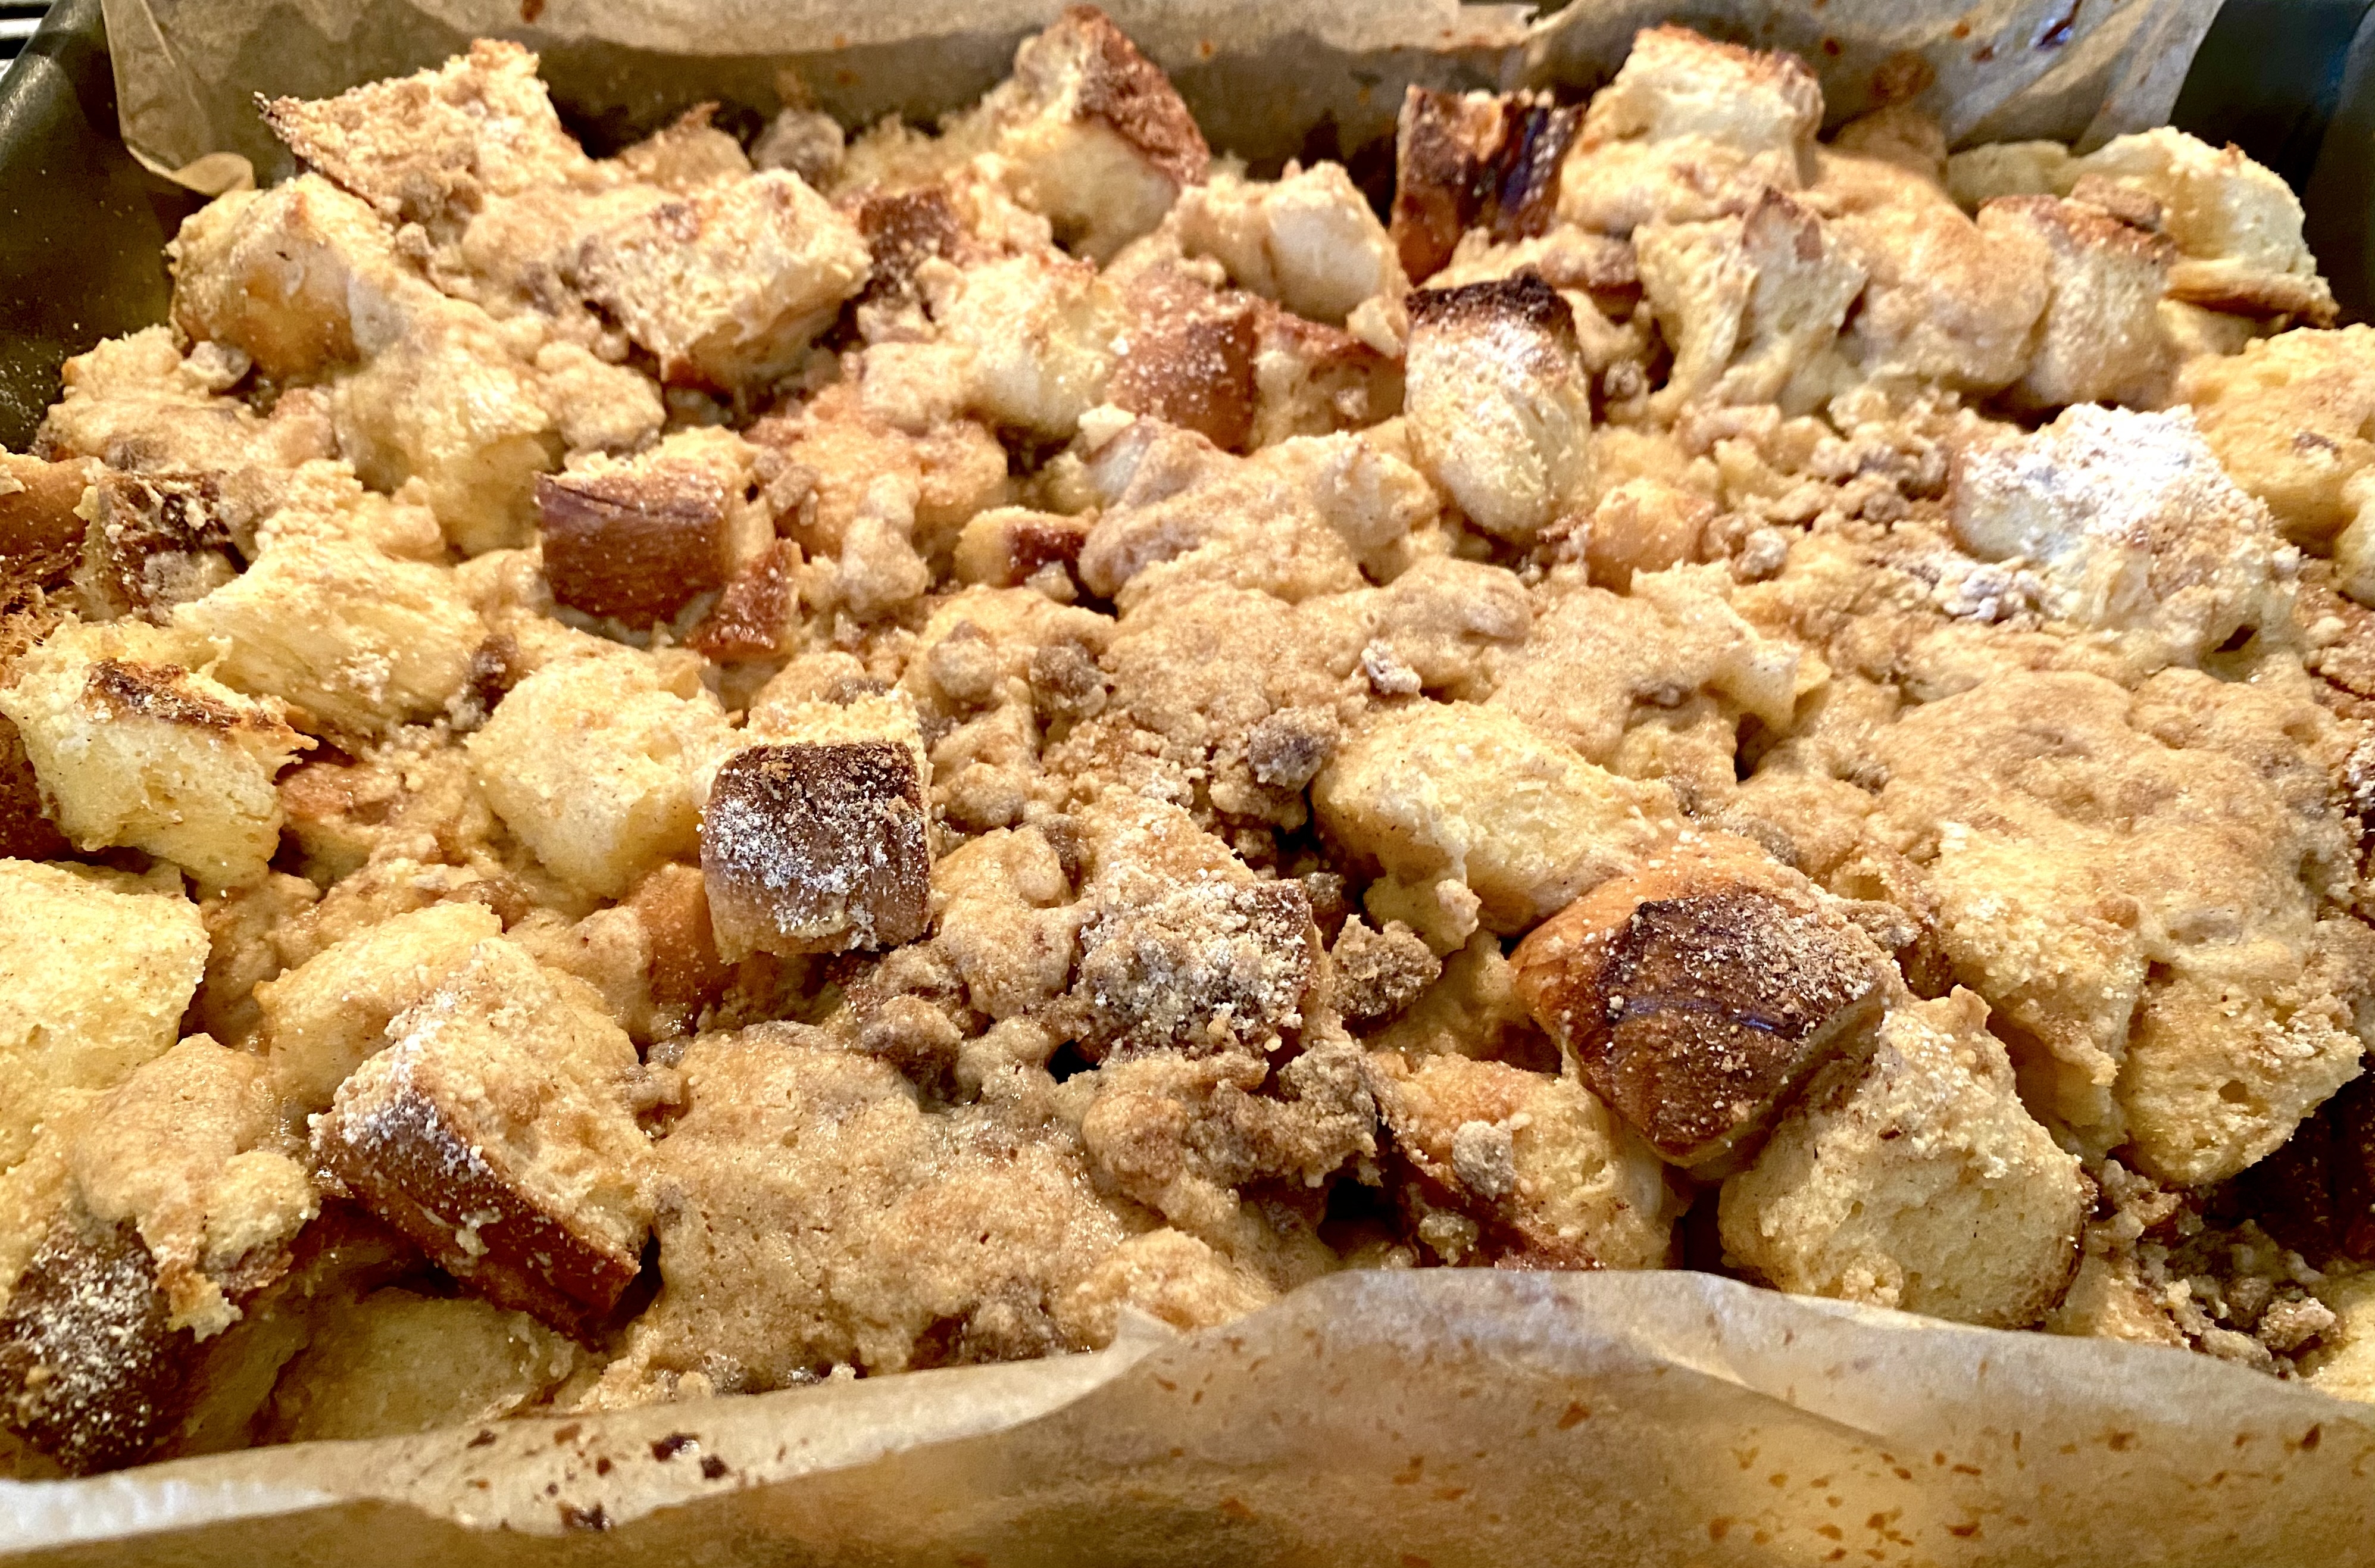 Plan ahead for Christmas morning with this overnight brioche French Toast Casserole